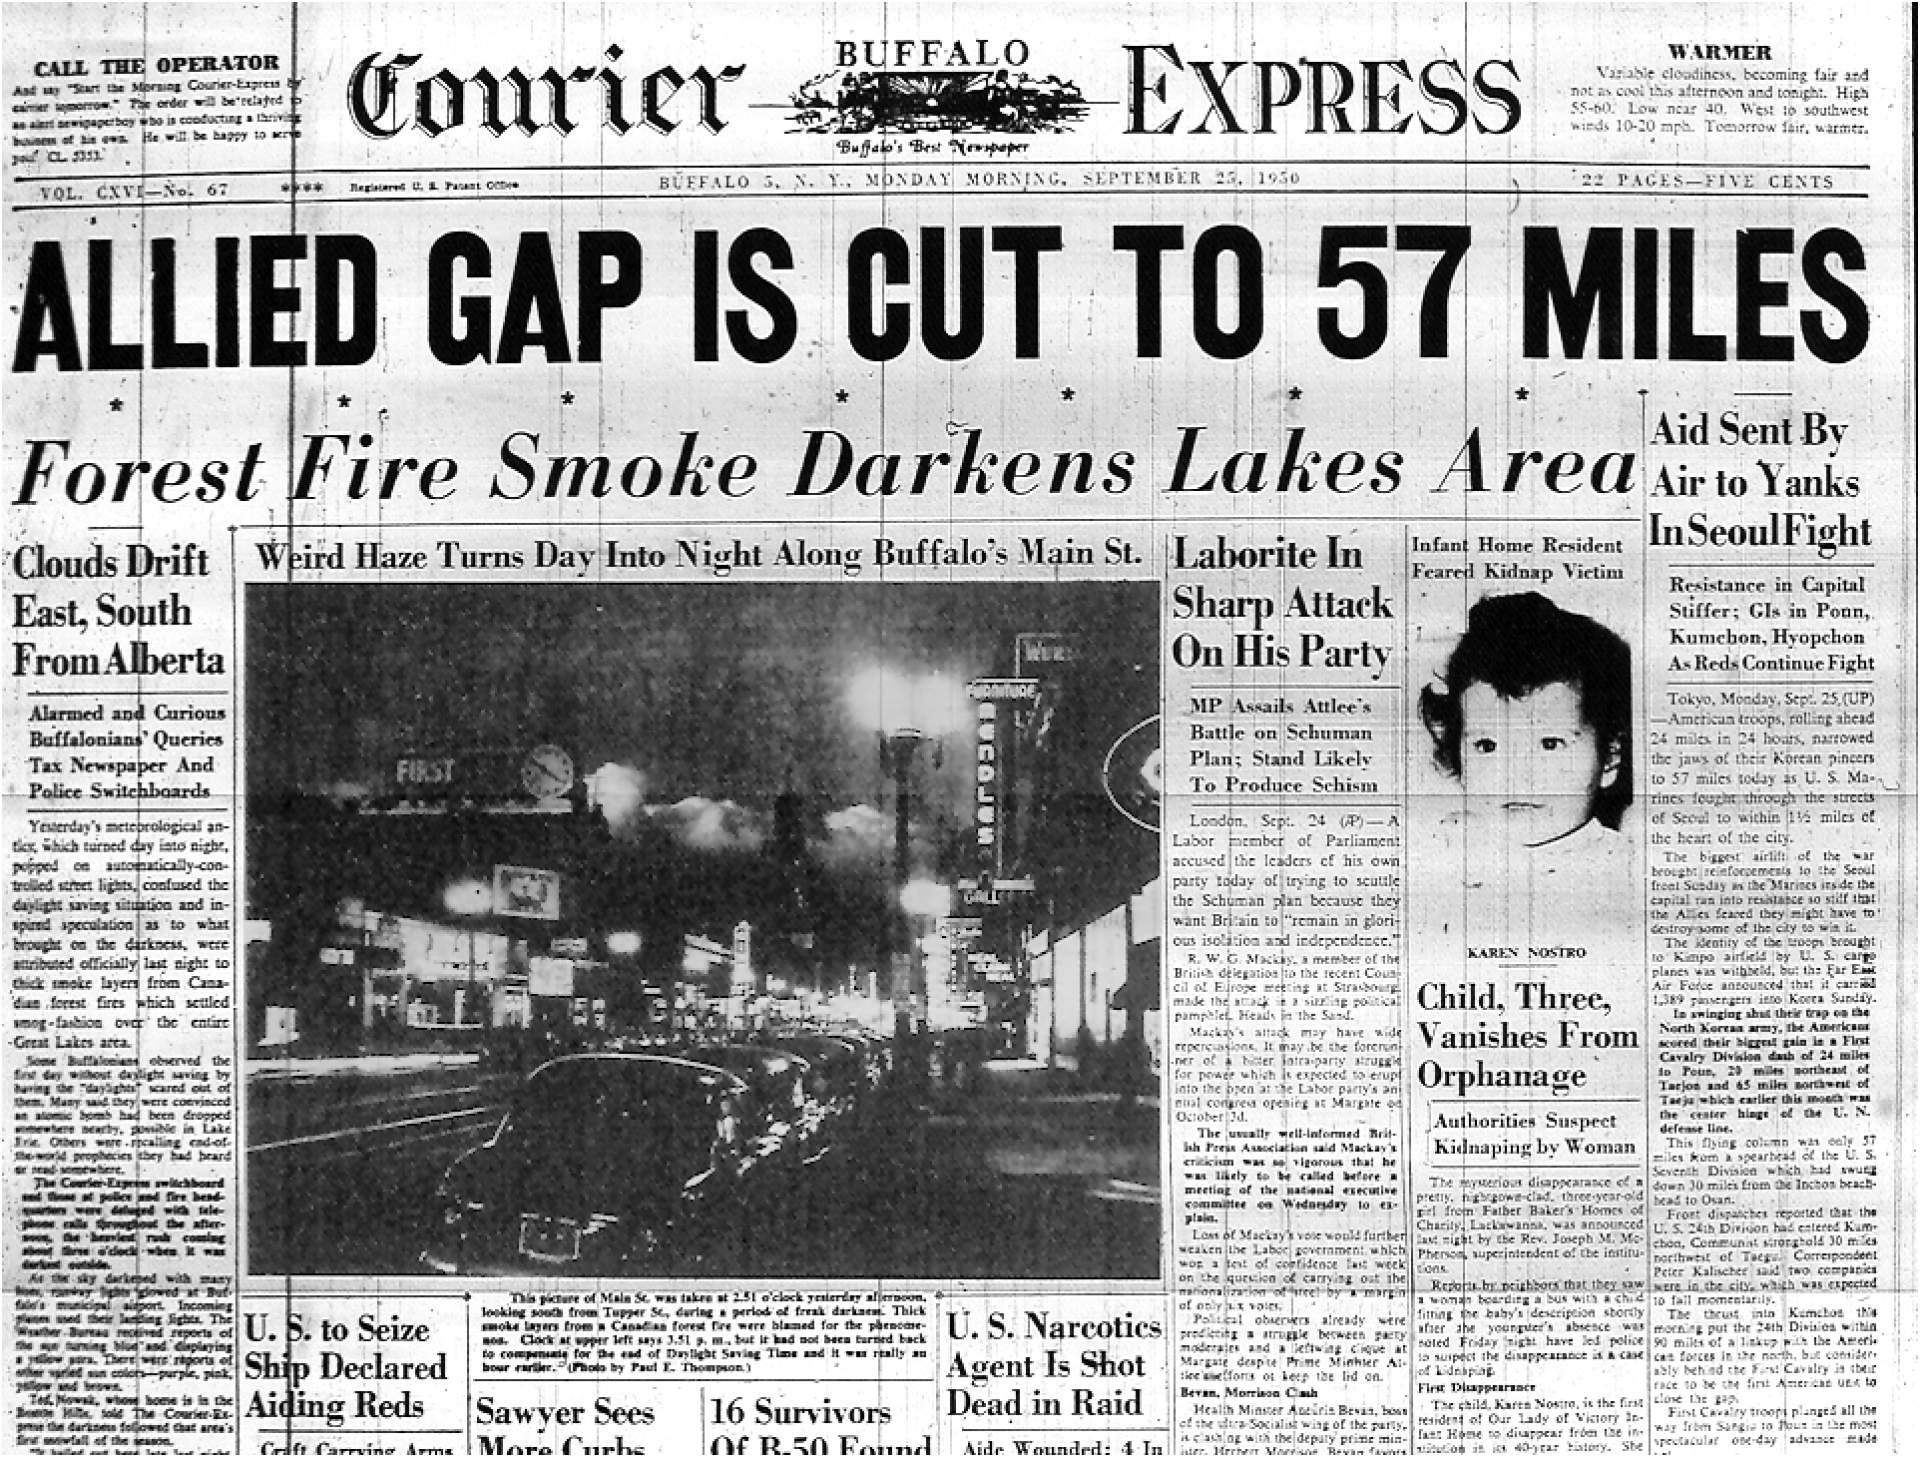 The Day the Sun Disappeared—September 24, 1950